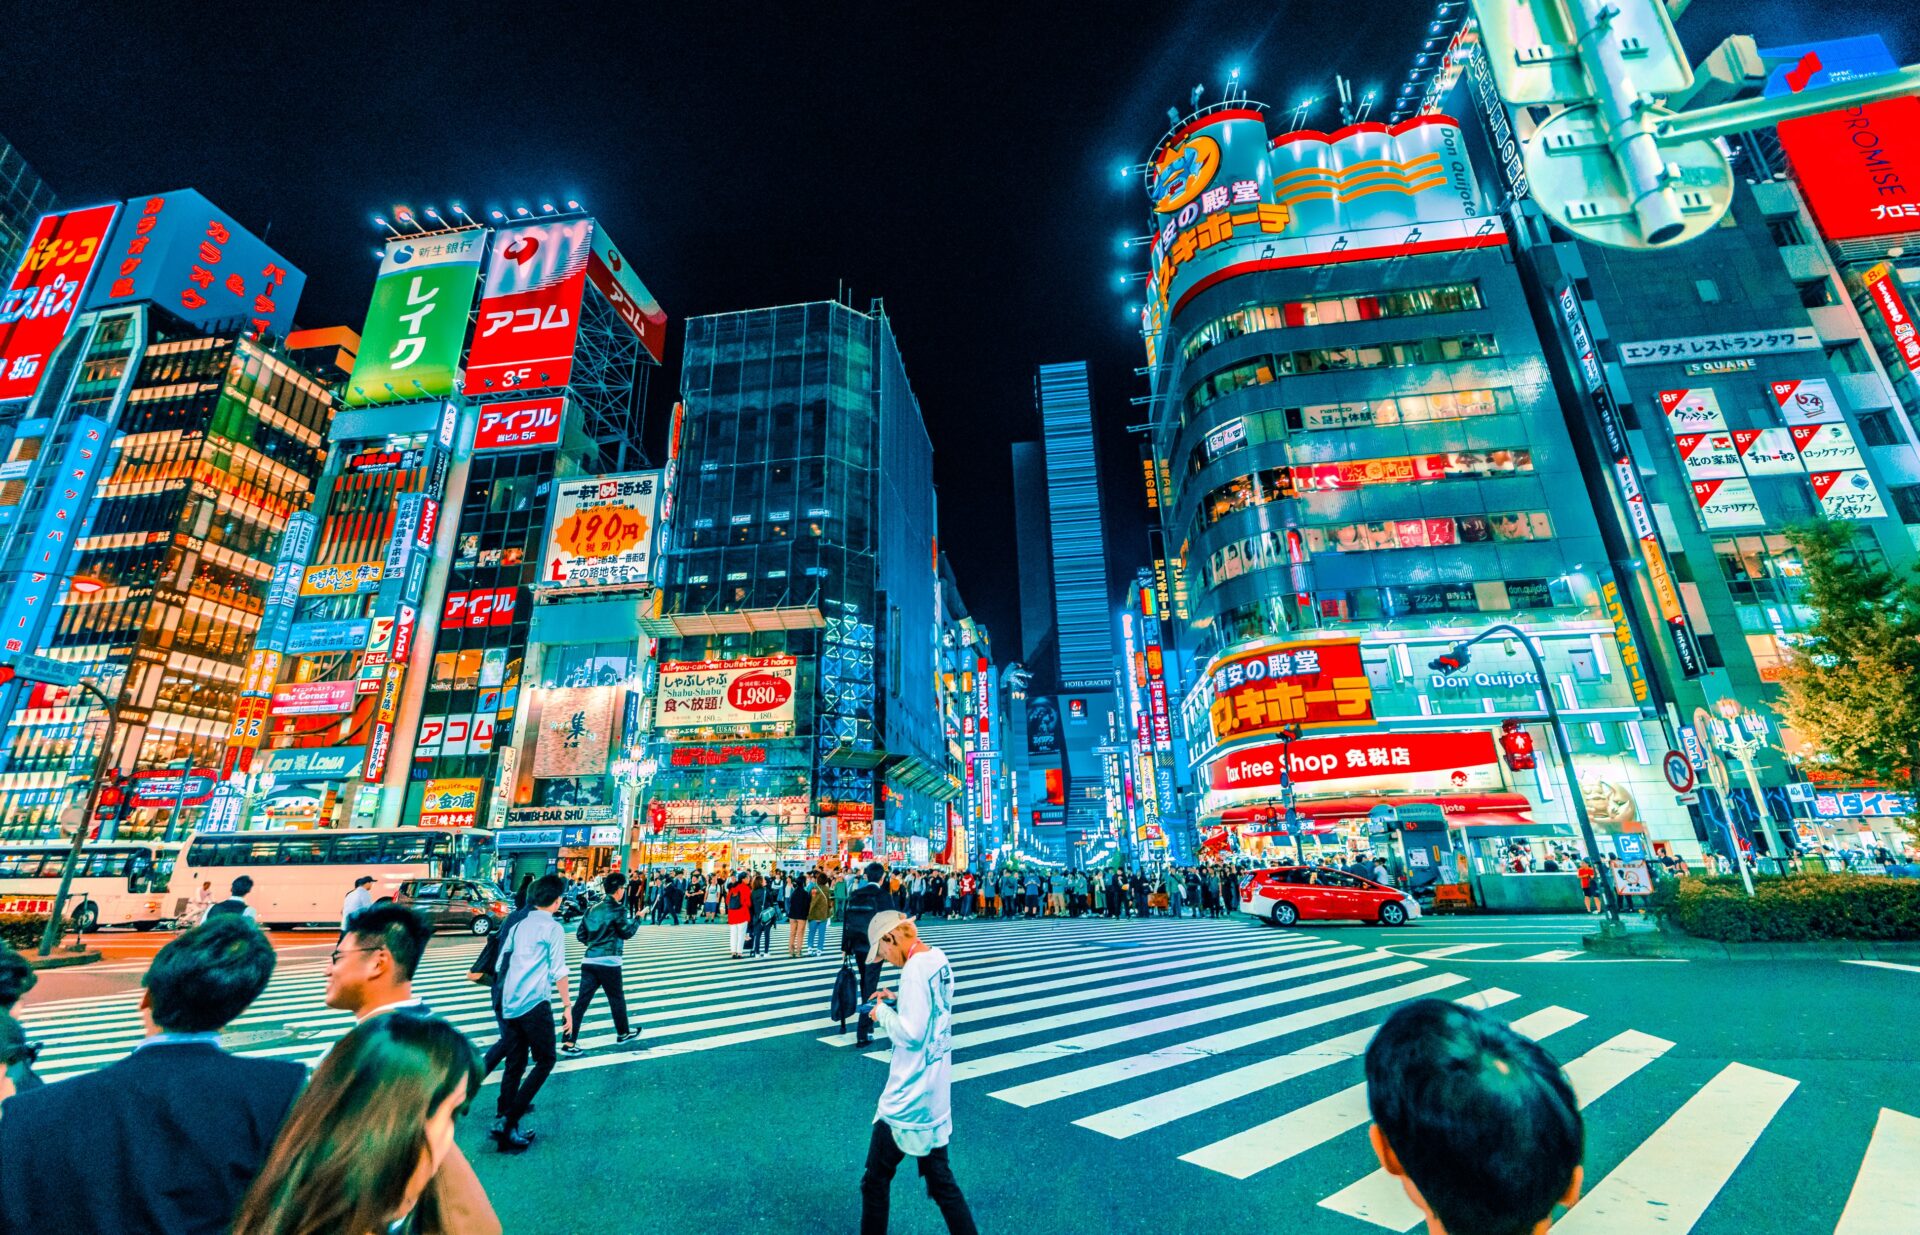 Tokyo became a megacity by reinventing itself